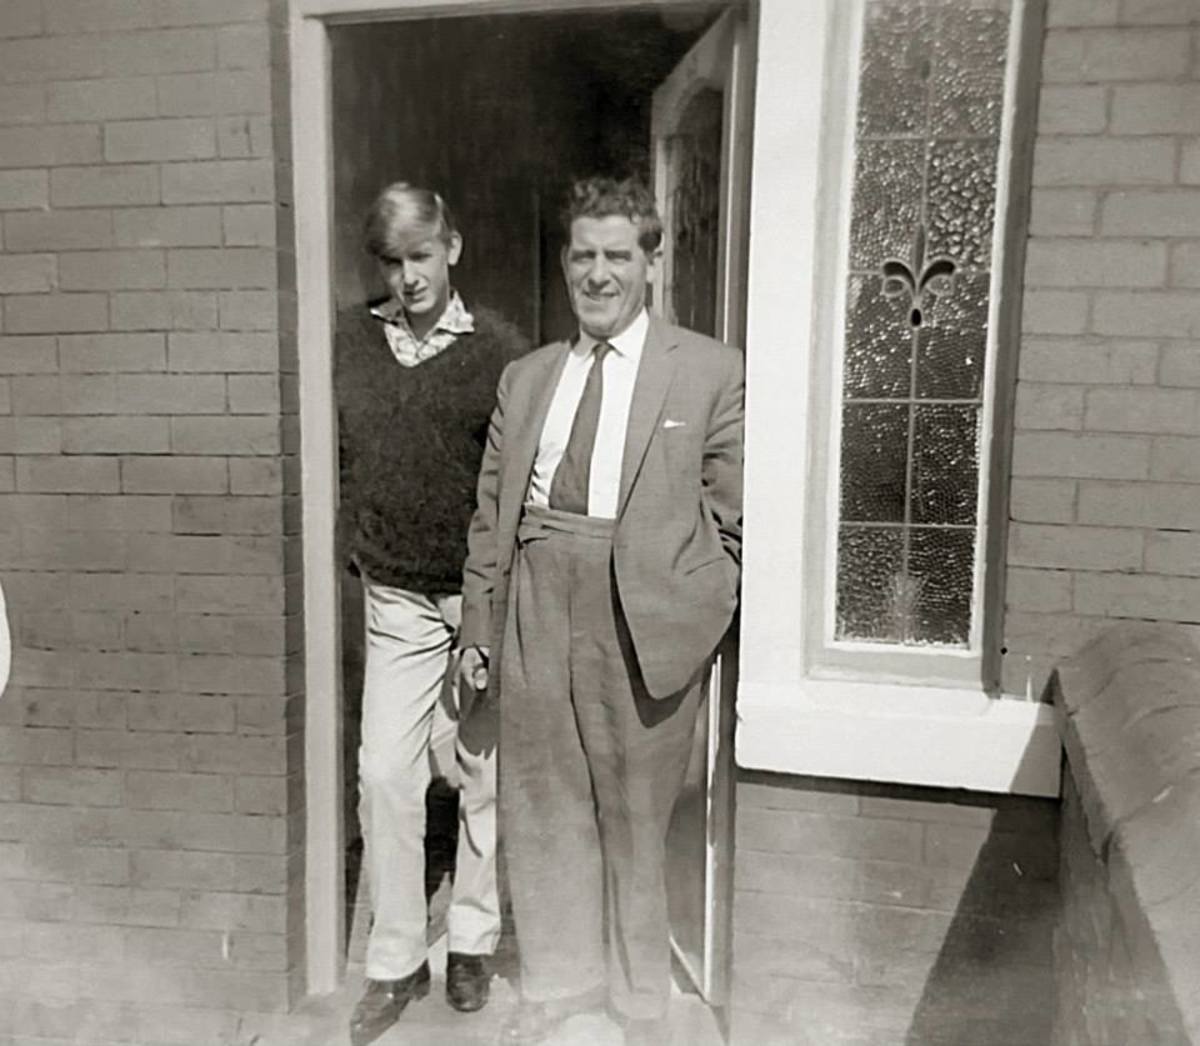 Eric with our granddad on our front doorstep in the house where we grew up